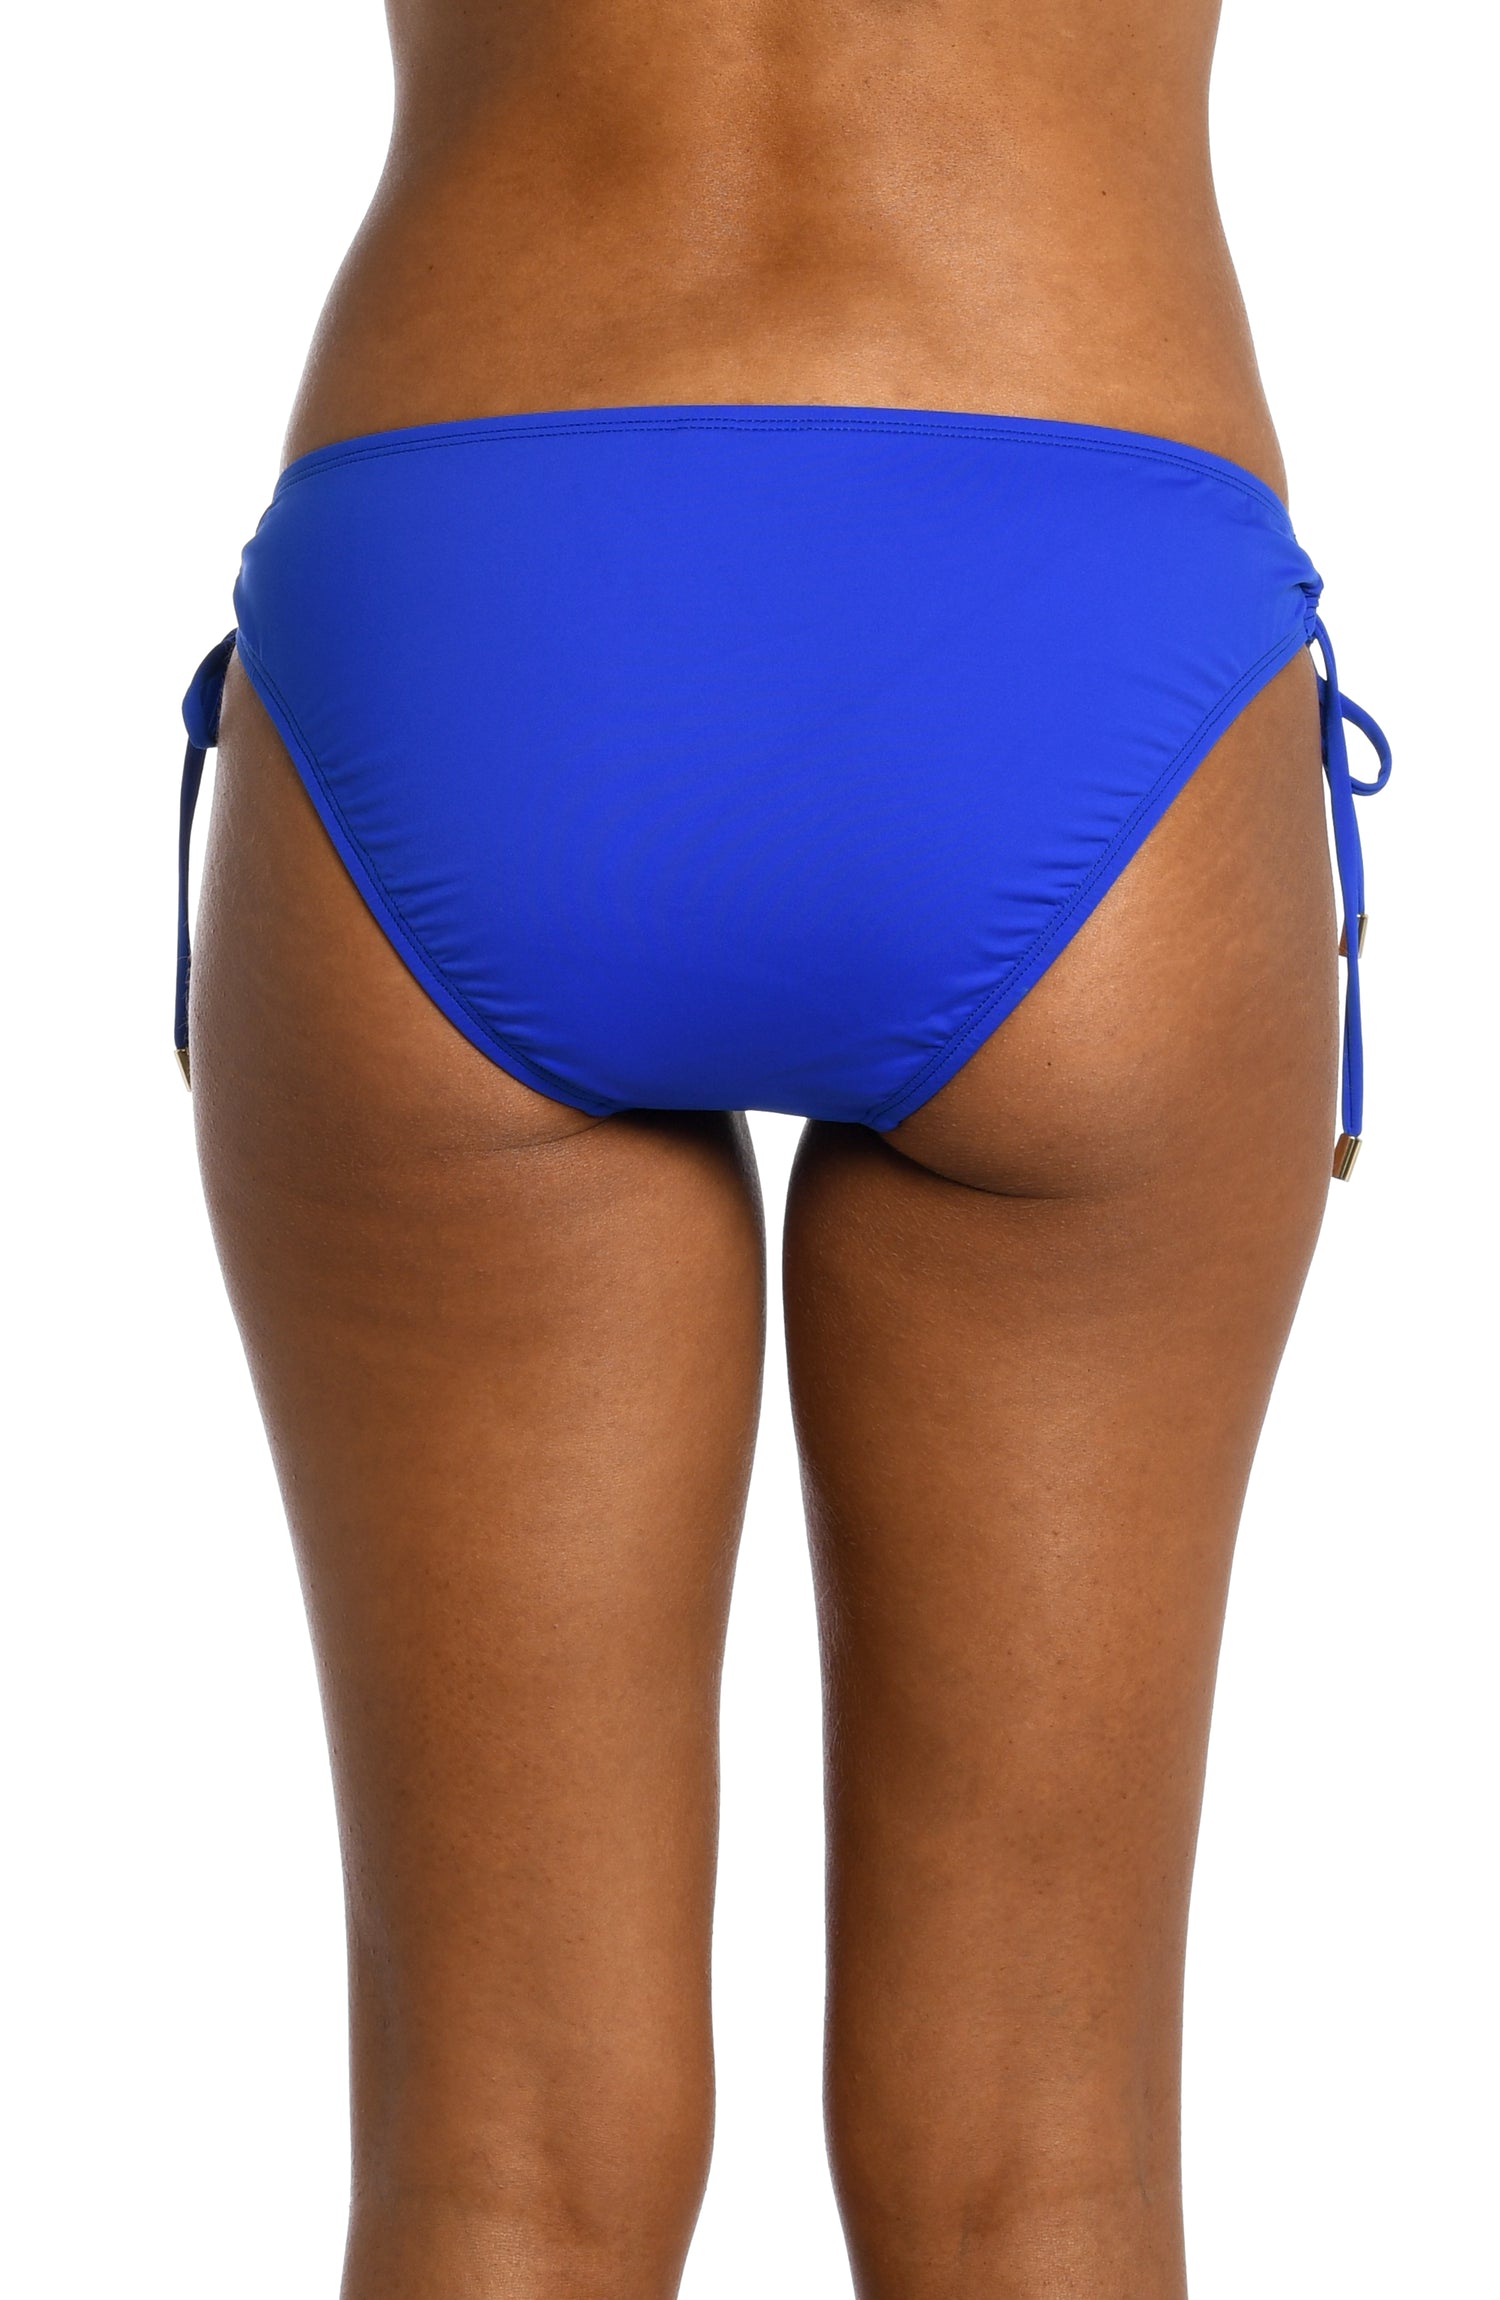 Model is wearing a sapphire colored side-tie hipster swimsuit bottom from our Best-Selling Island Goddess collection.